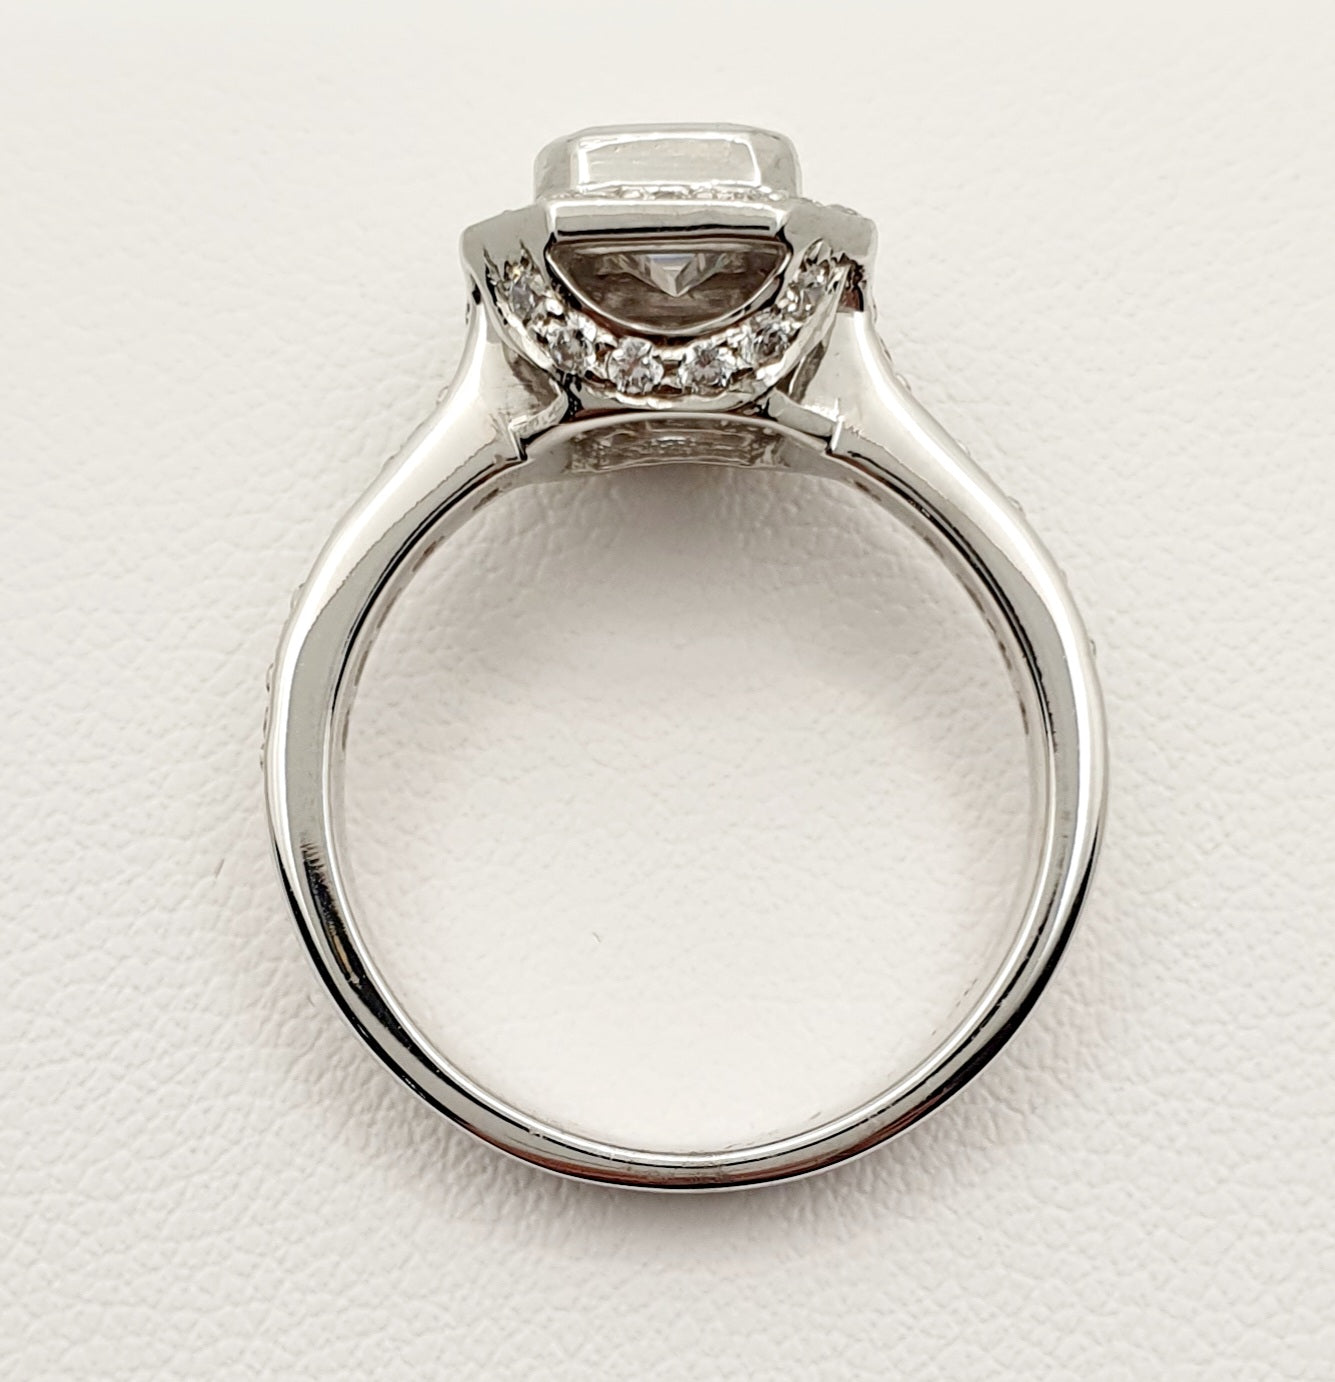 9ct White Gold Cubic Zirconia Ring With Emerald Cut Centre Stone